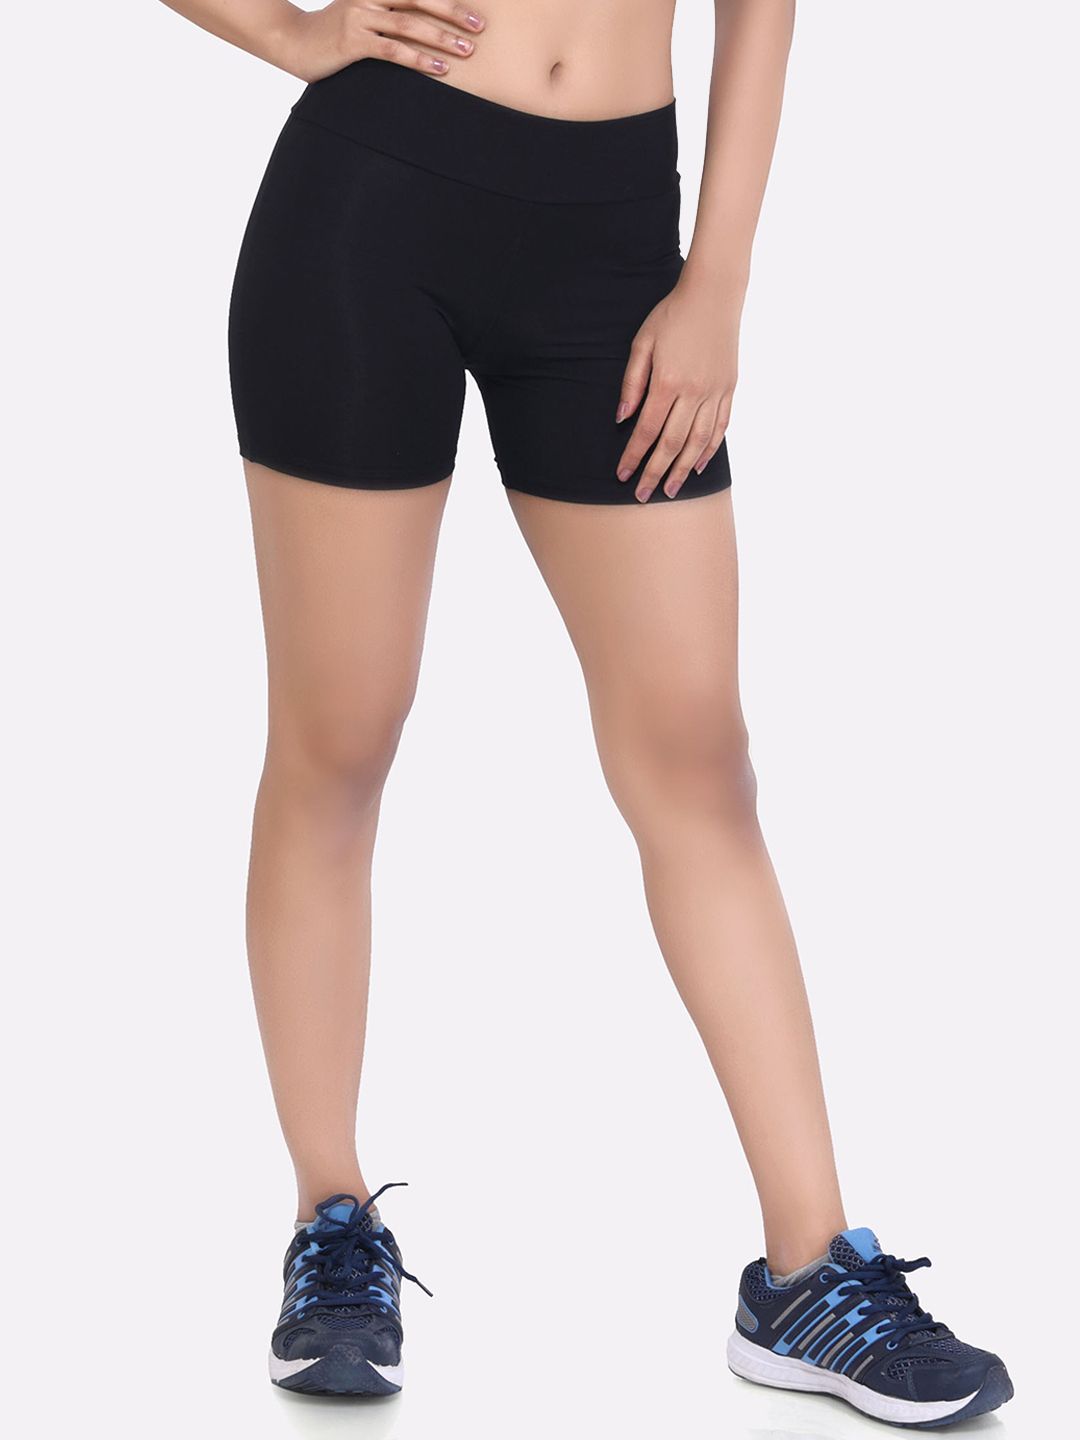 LAASA SPORTS Women Black Skinny Fit High-Rise Training or Gym Sports Shorts Price in India